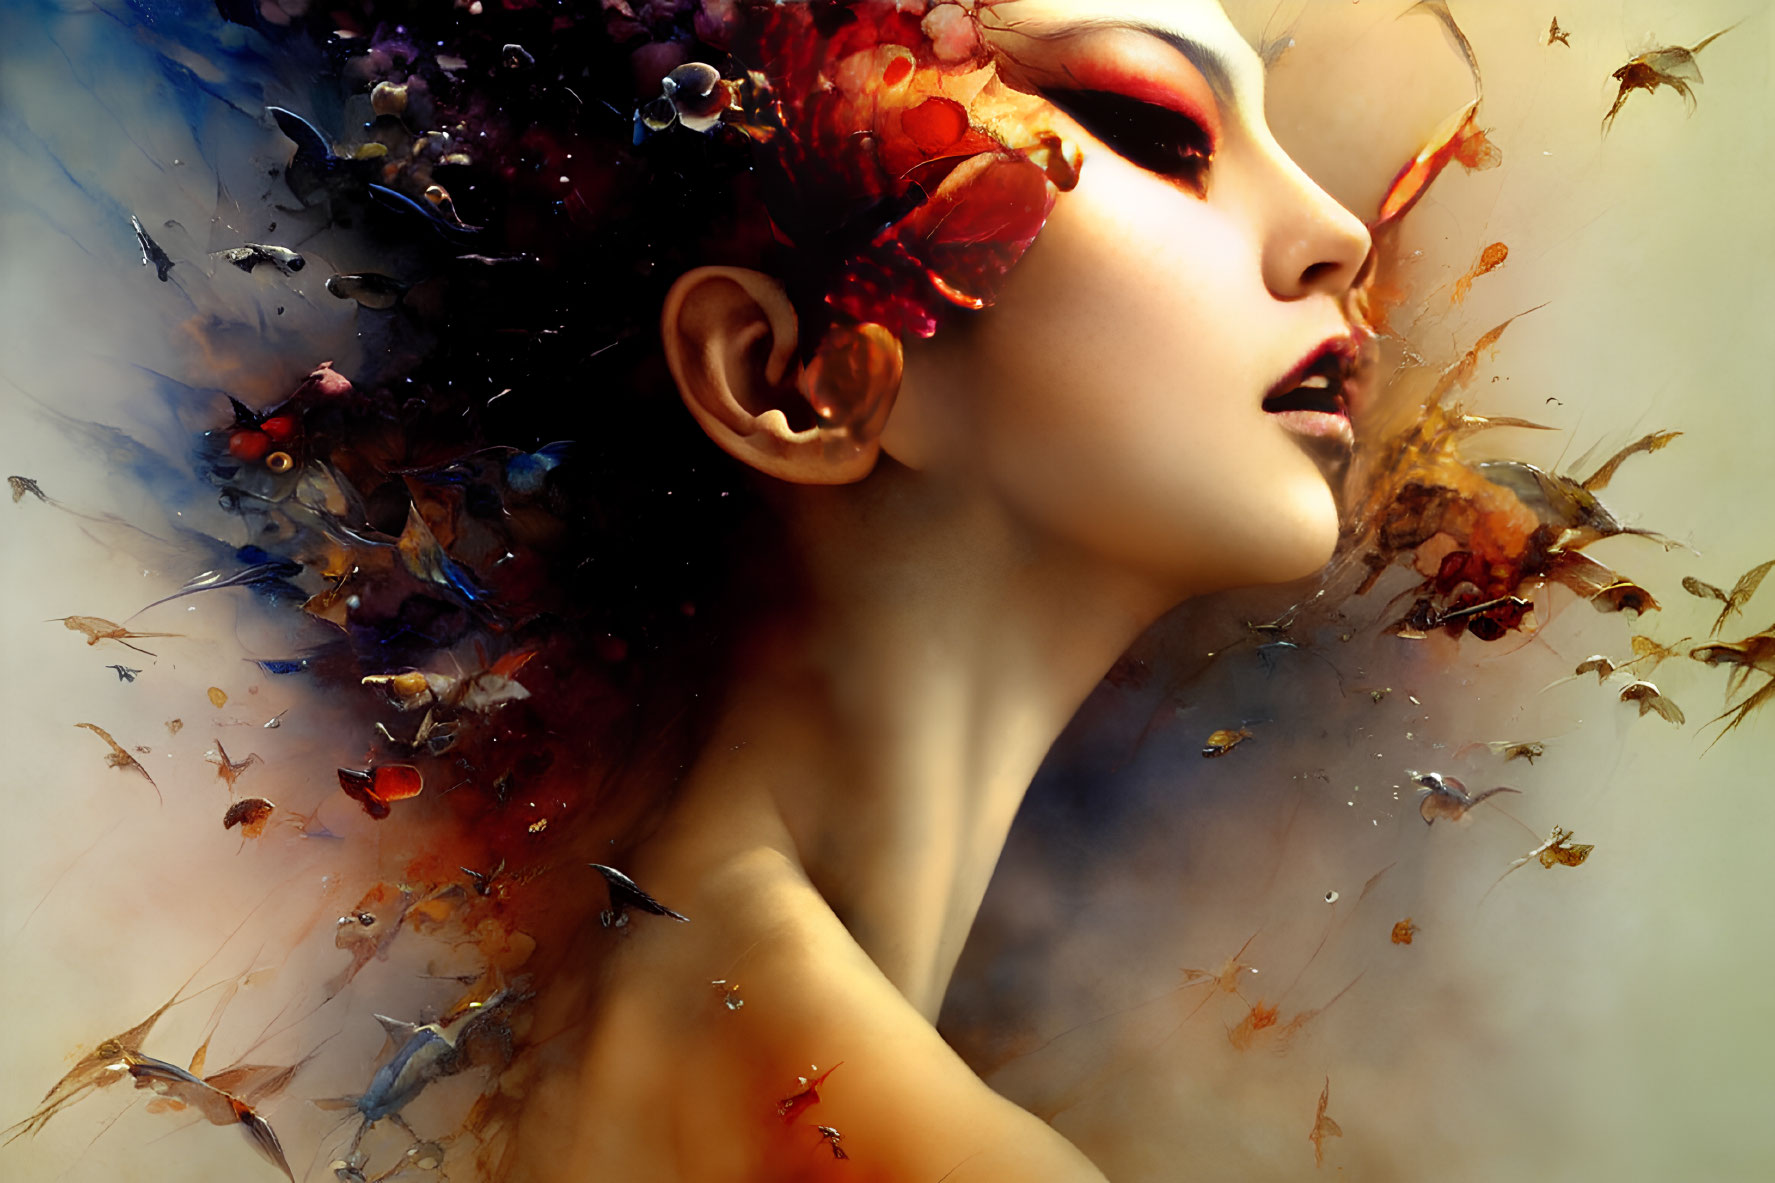 Colorful portrait of a woman with vibrant makeup and flying creatures in dreamy setting